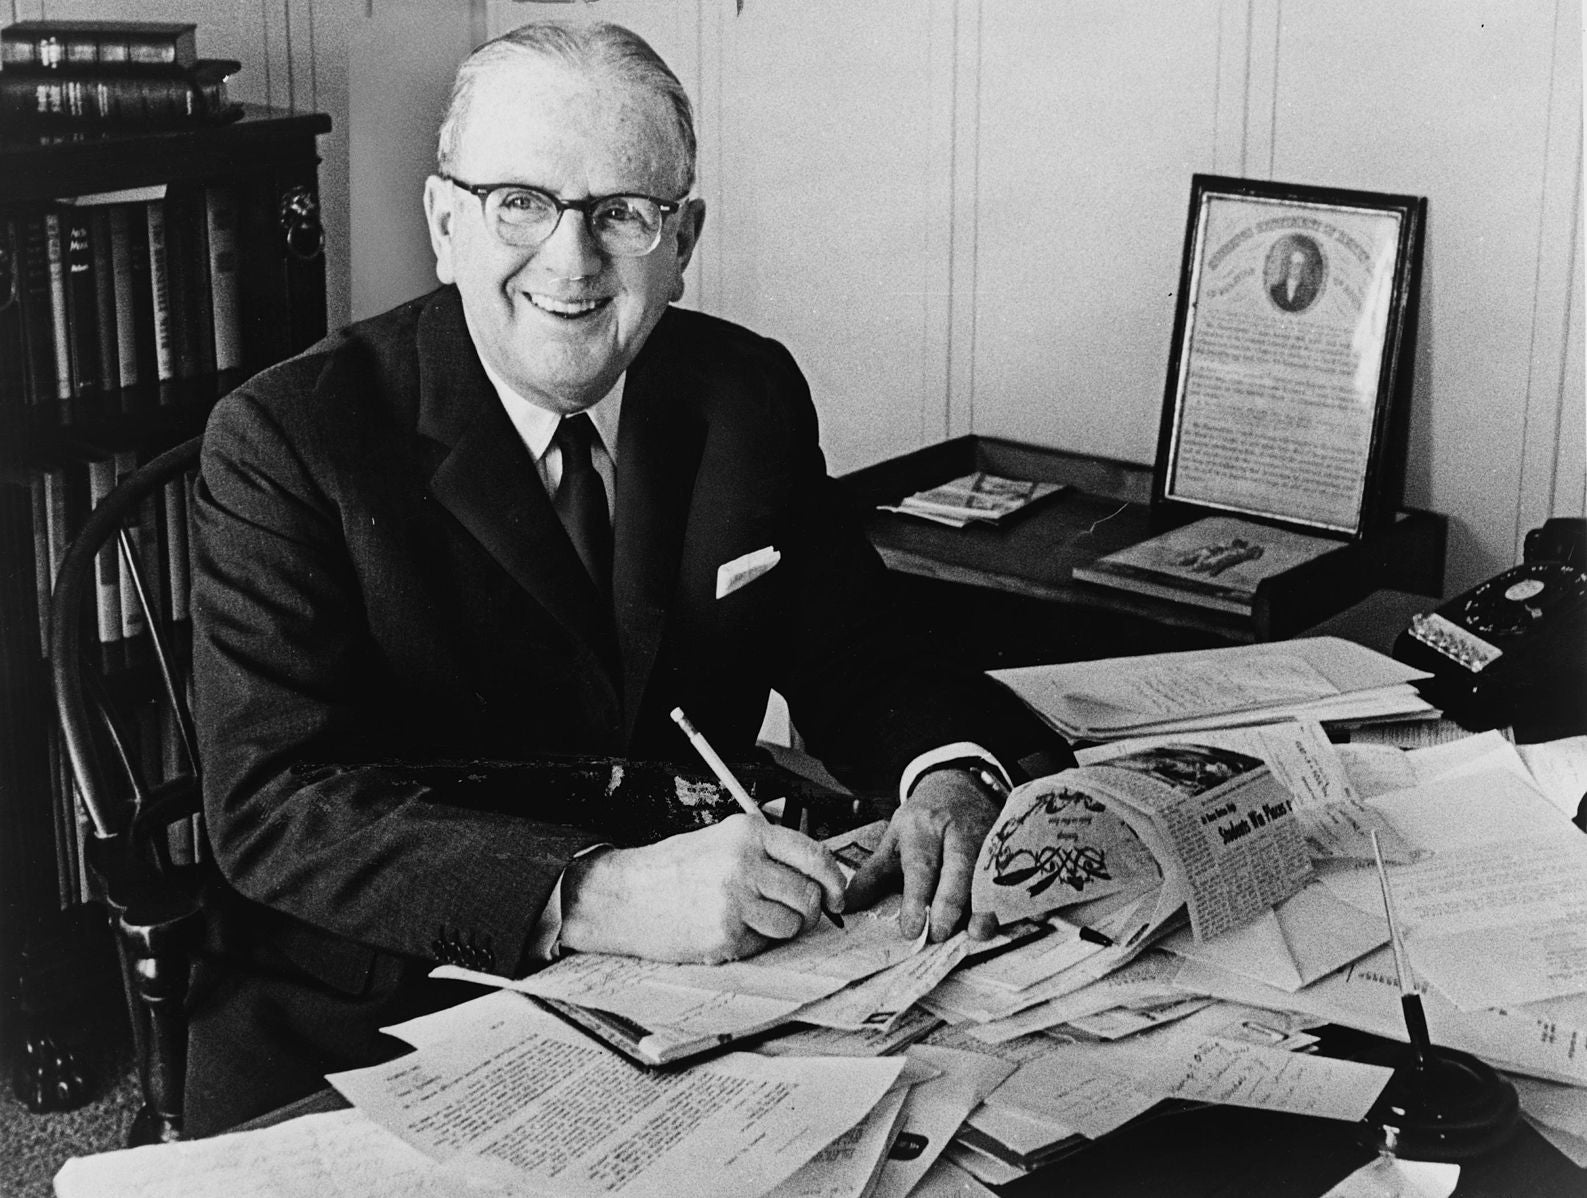 Norman Vincent Peale, Christian preacher and author, was a progenitor of the theory of ‘positive thinking’